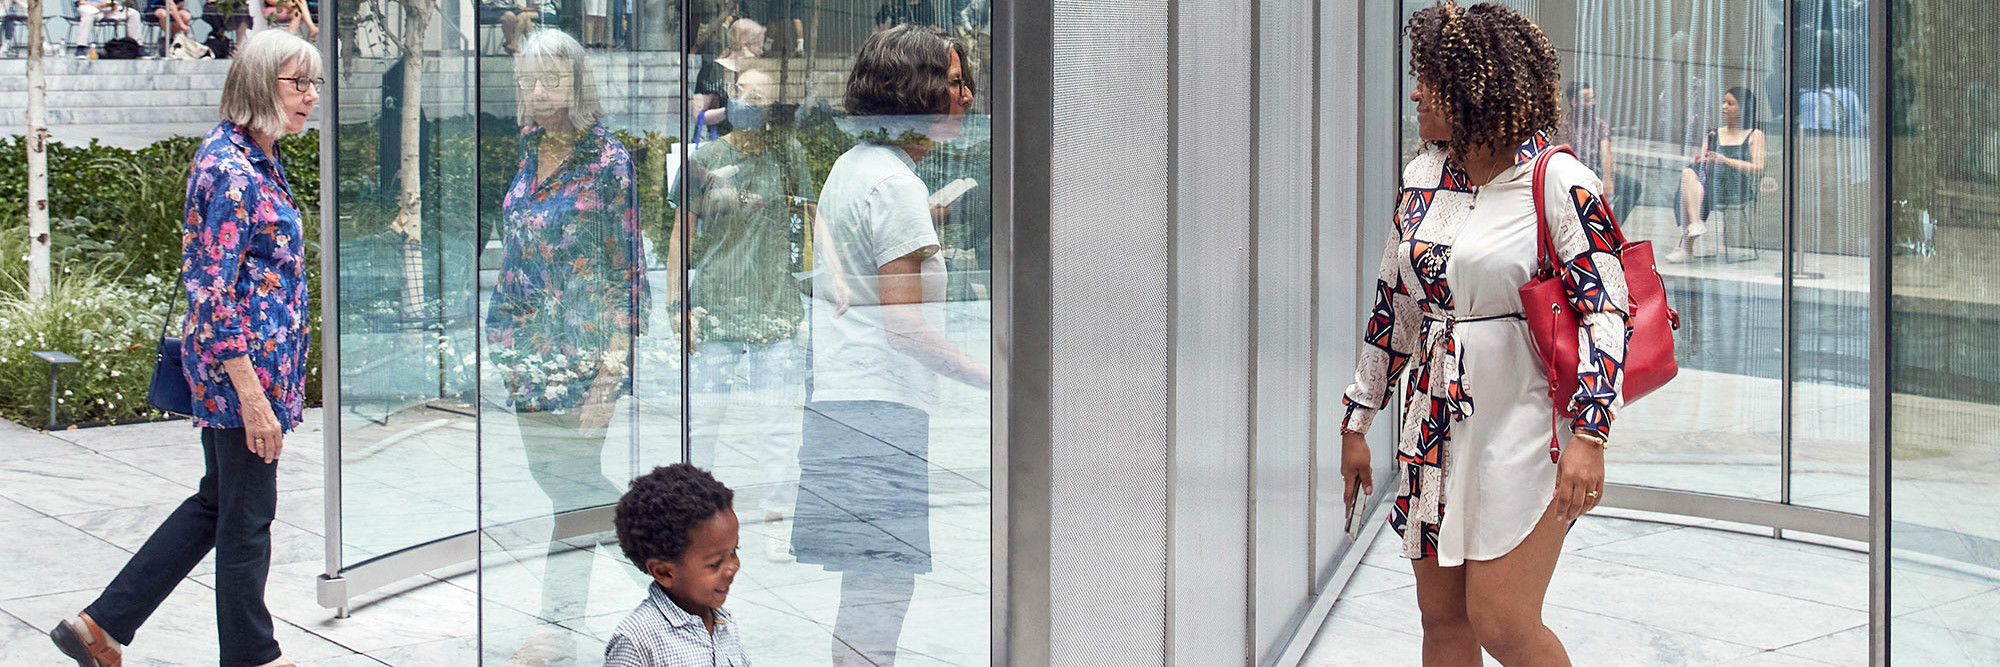 Dan Graham. Child’s Play. 2015–16. Two-way mirror glass, stainless steel and perforated steel. Gift of the Committee on Painting and Sculpture in honor of Cora Rosevear. © 2022 The Museum of Modern Art, New York. Photo: Gus Powell